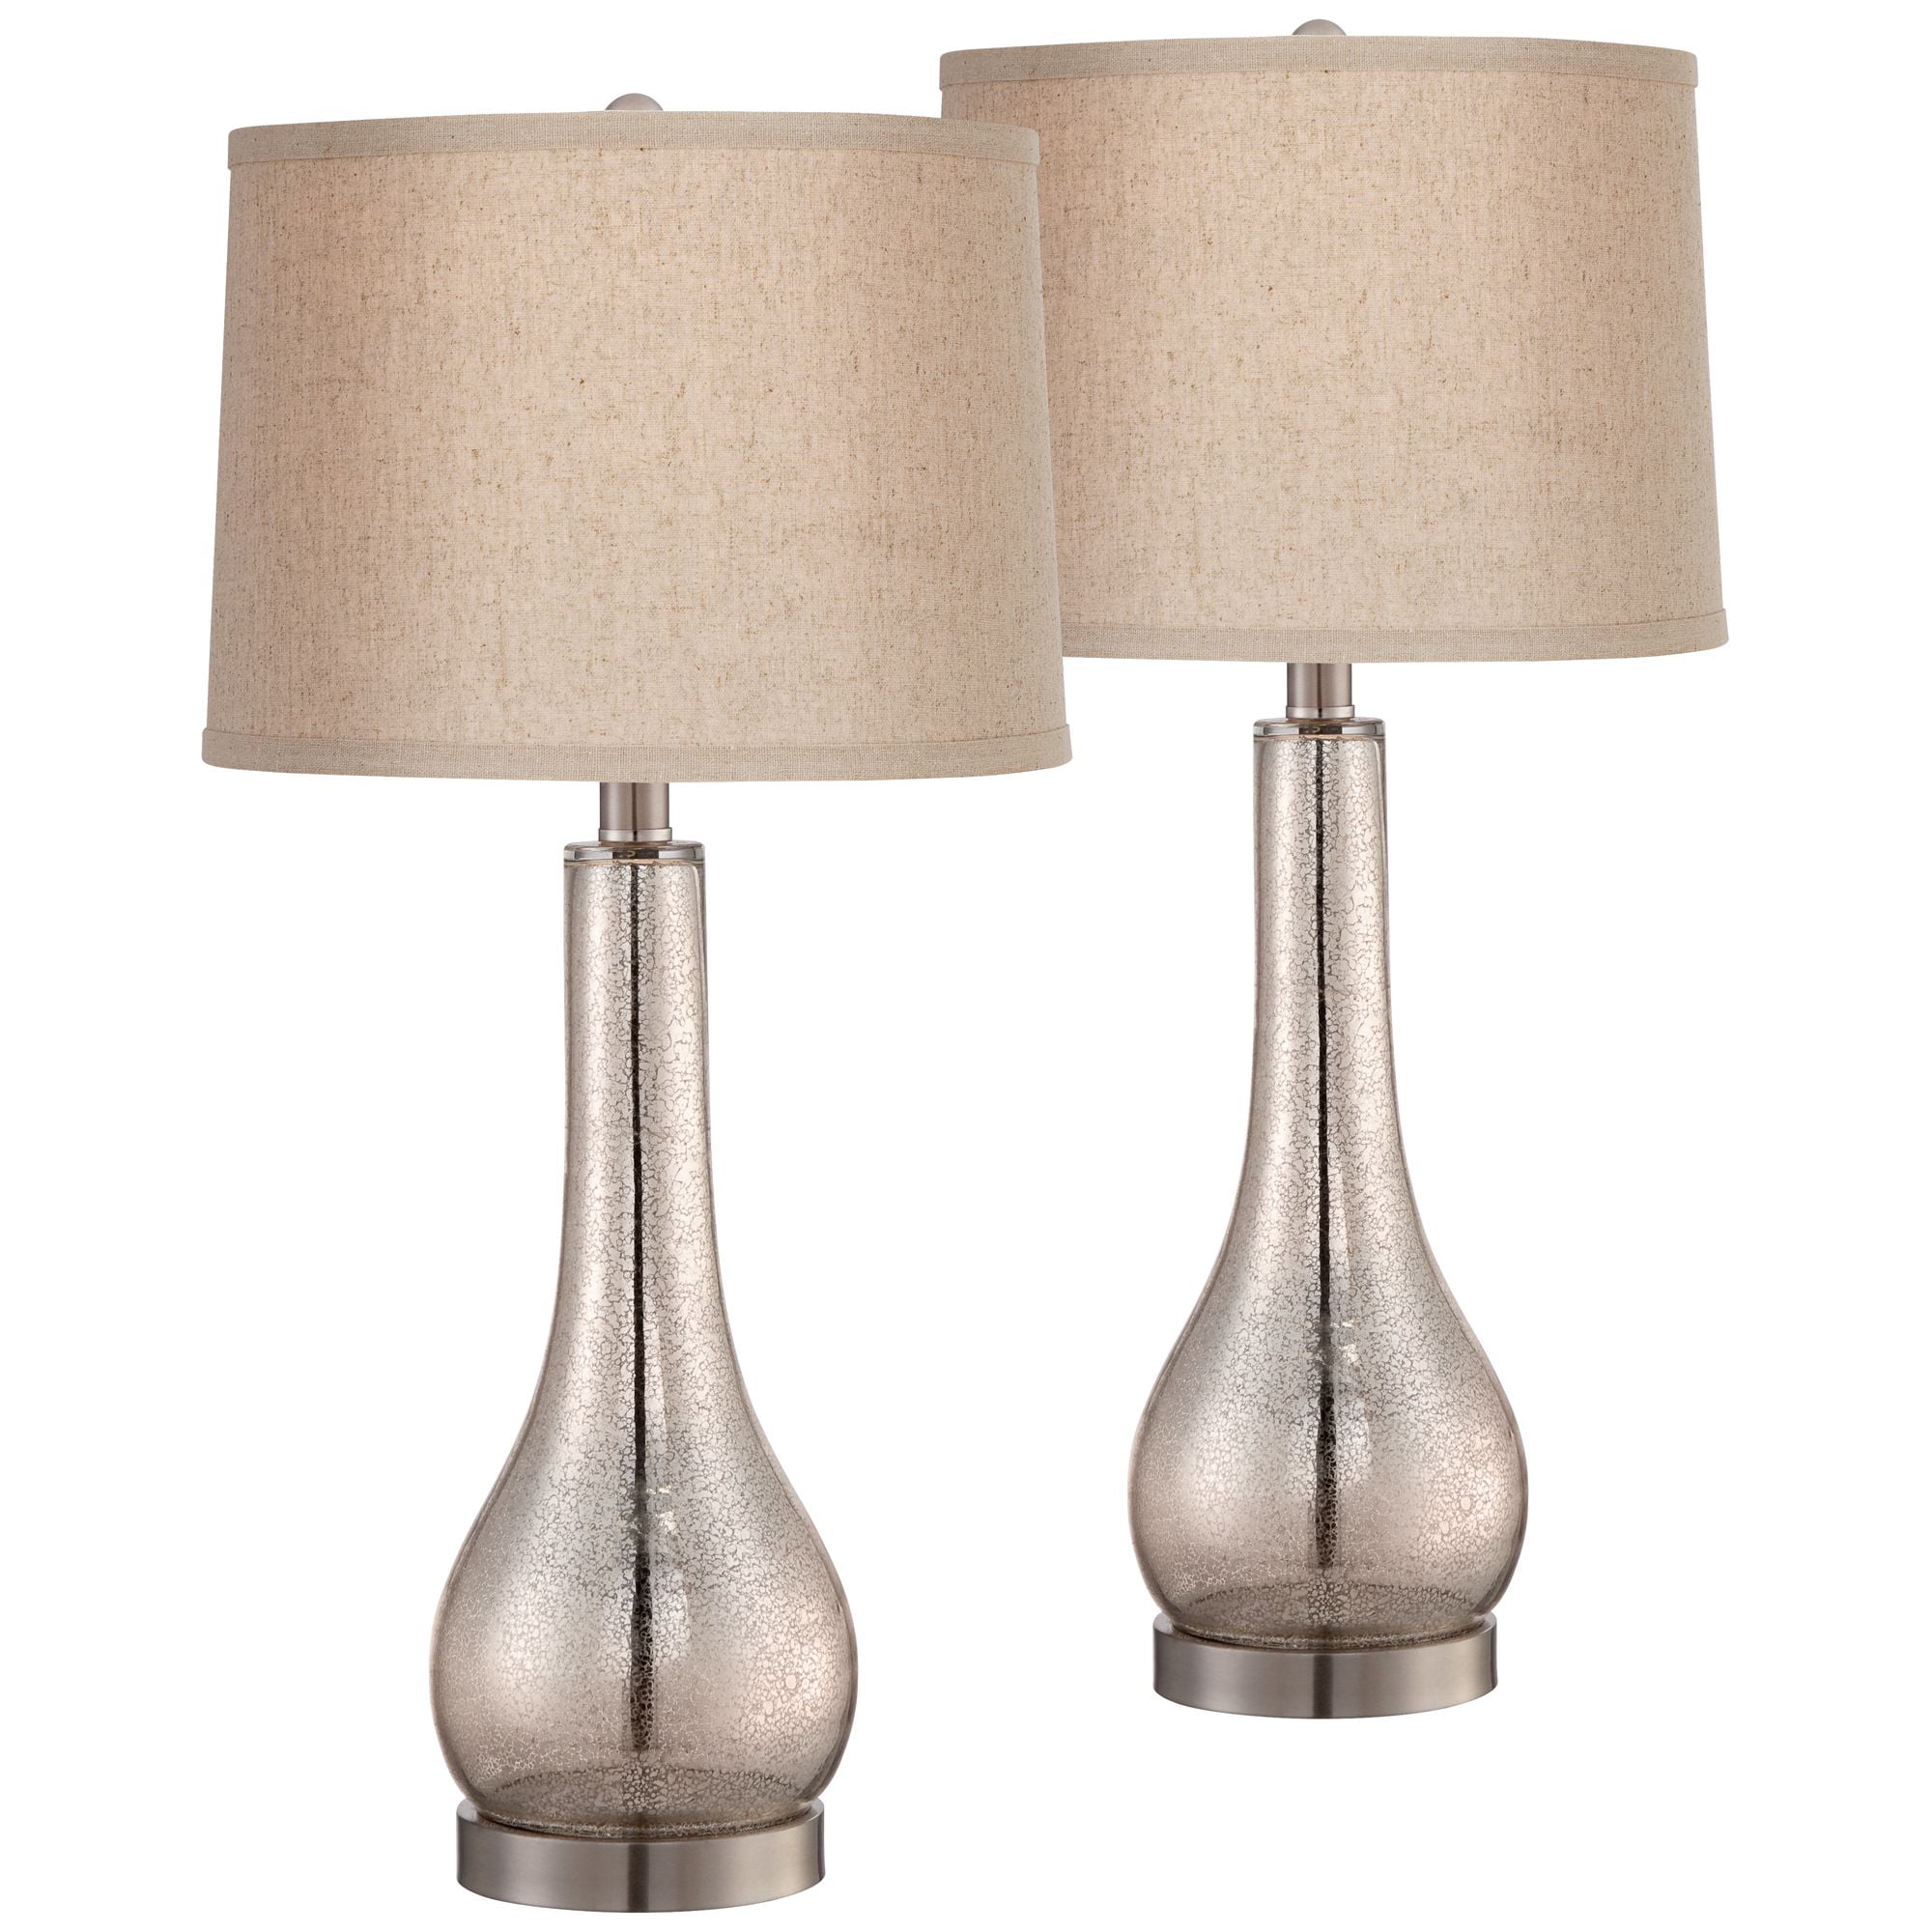 360 Lighting Coastal Table Lamps Set of 2 Mercury Glass Gourd Taupe